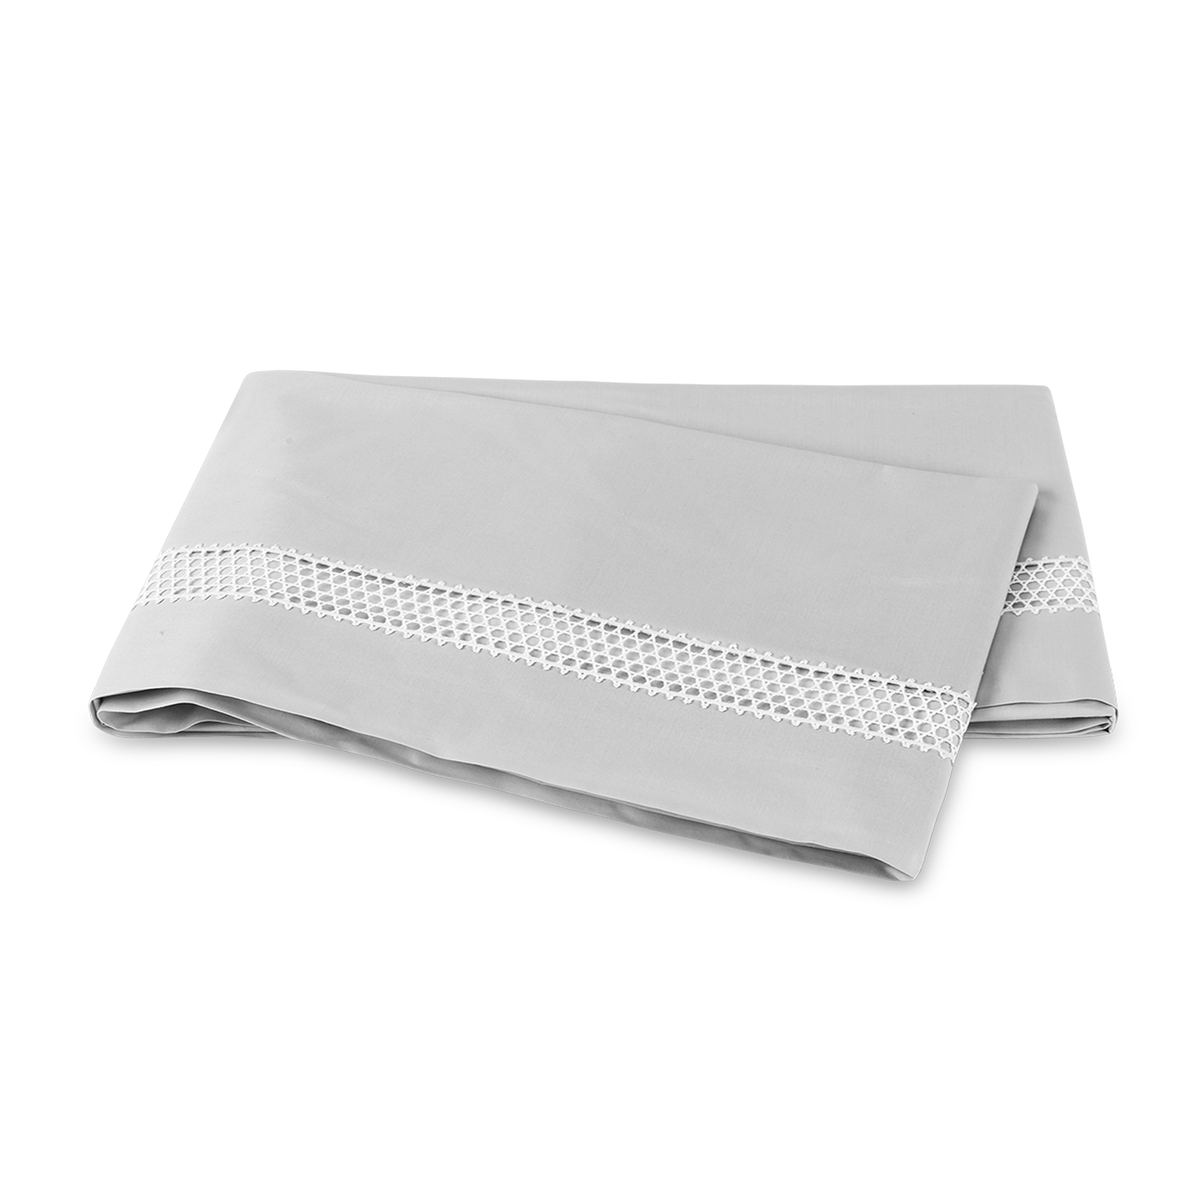 Clear Image of Matouk Cecily Flat Sheet in Silver Color